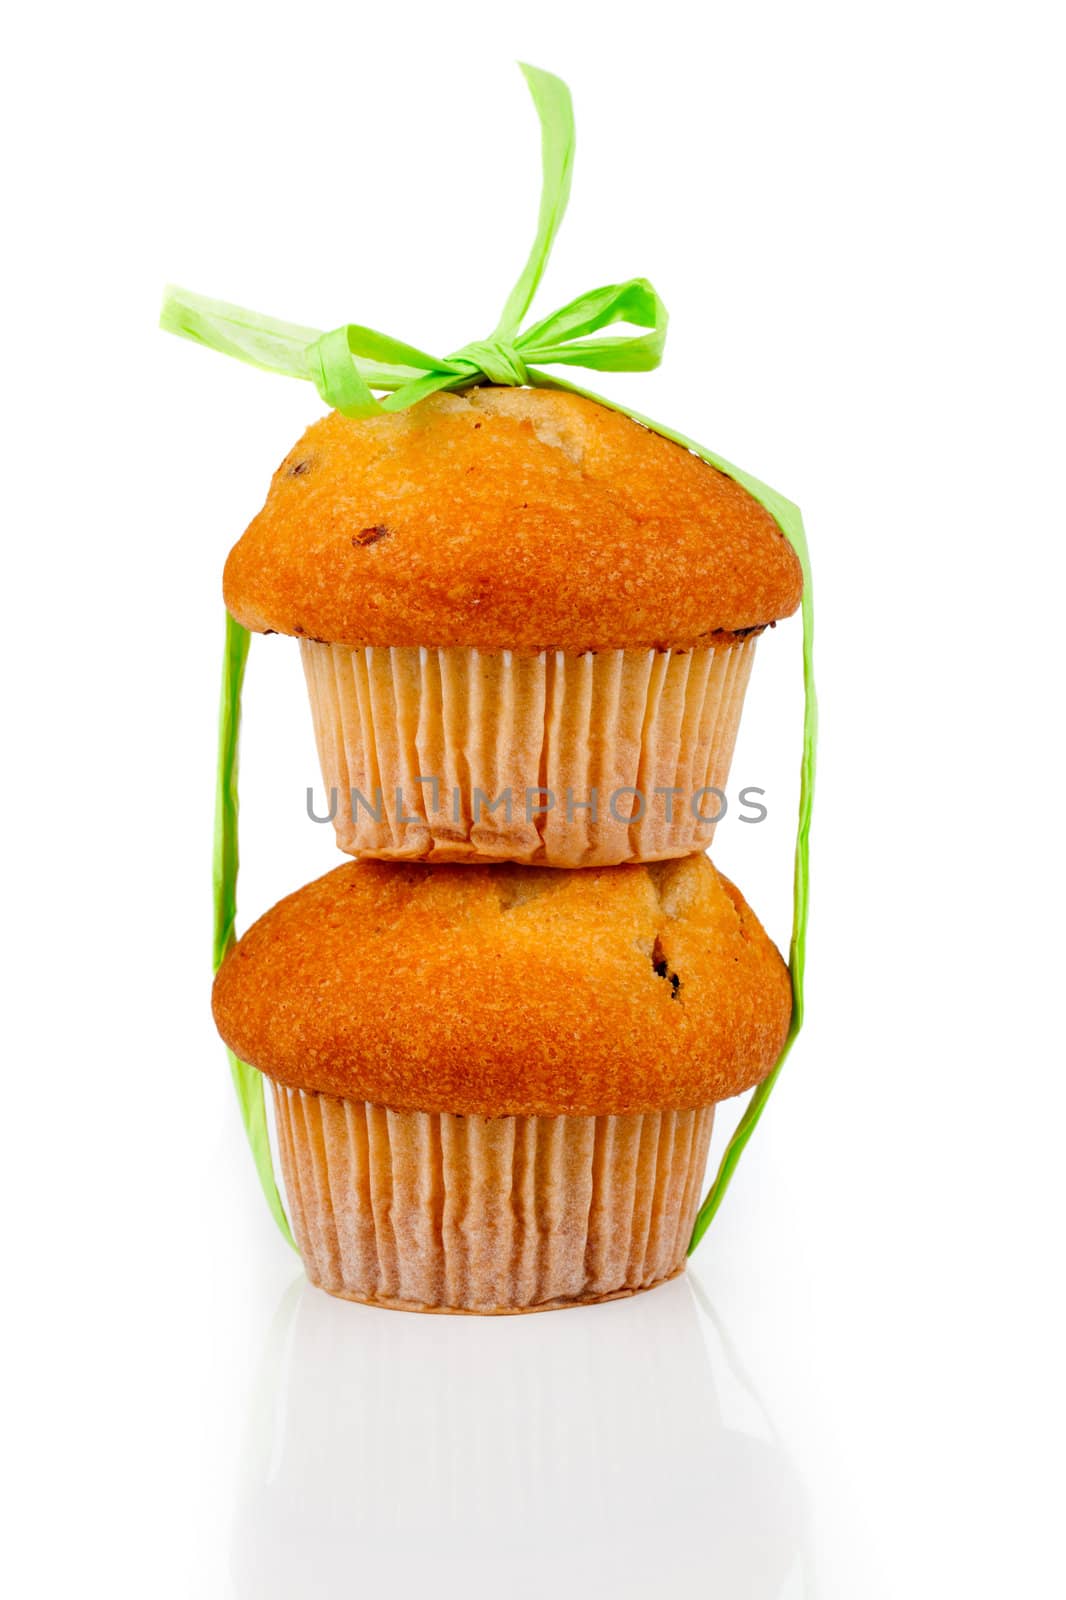 muffins connected by a green tape, on a white background by motorolka